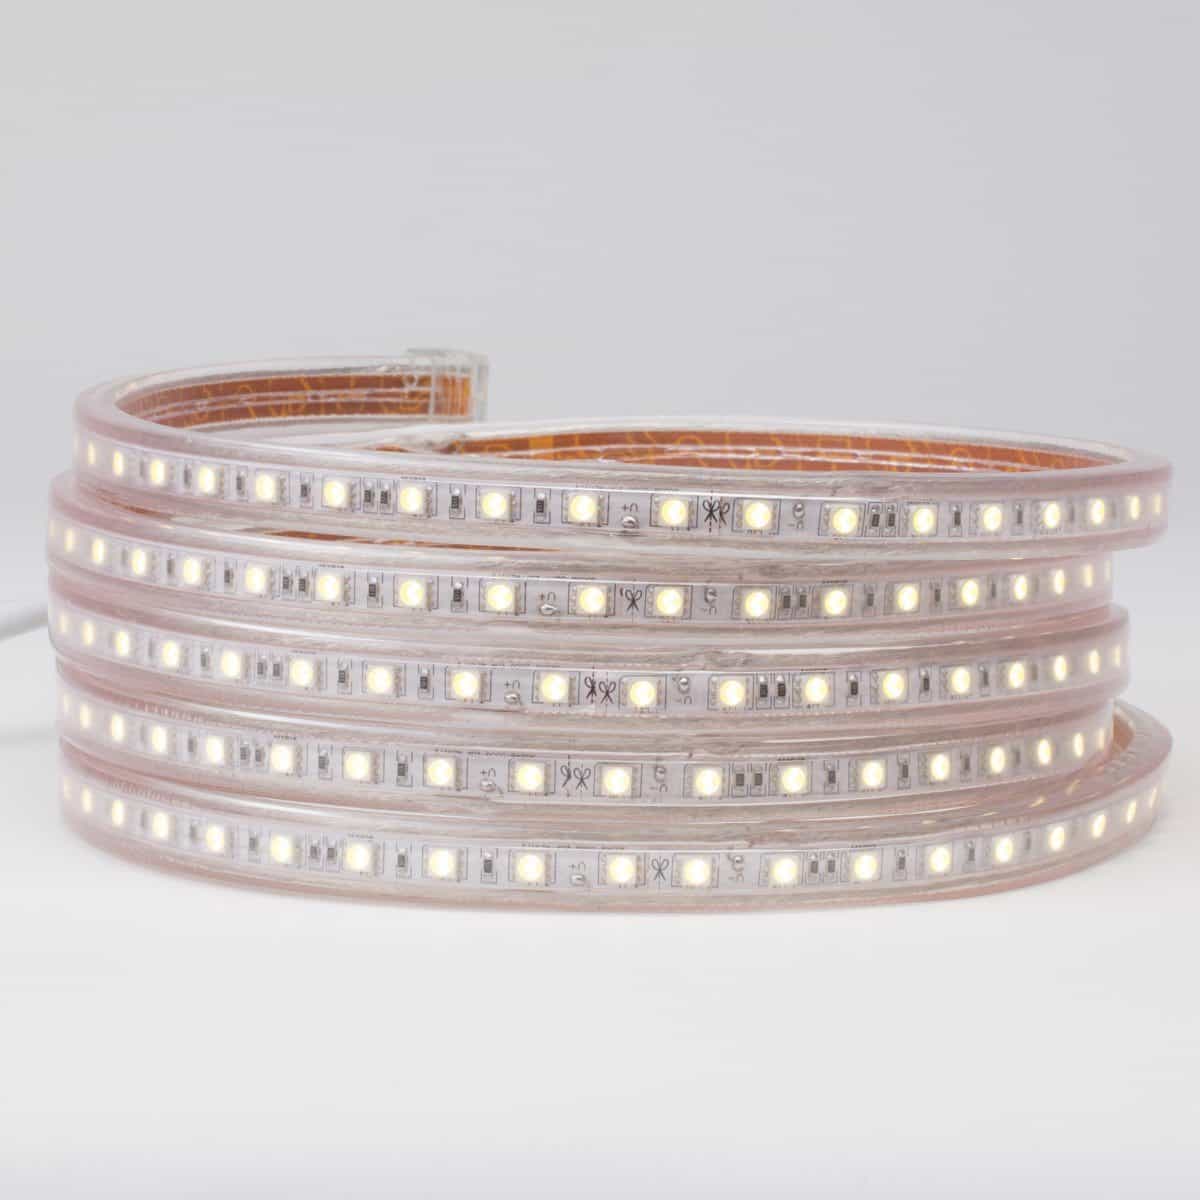 120V led strip lights on white background coiled five times with illuminated white color led chips and cap seal at end